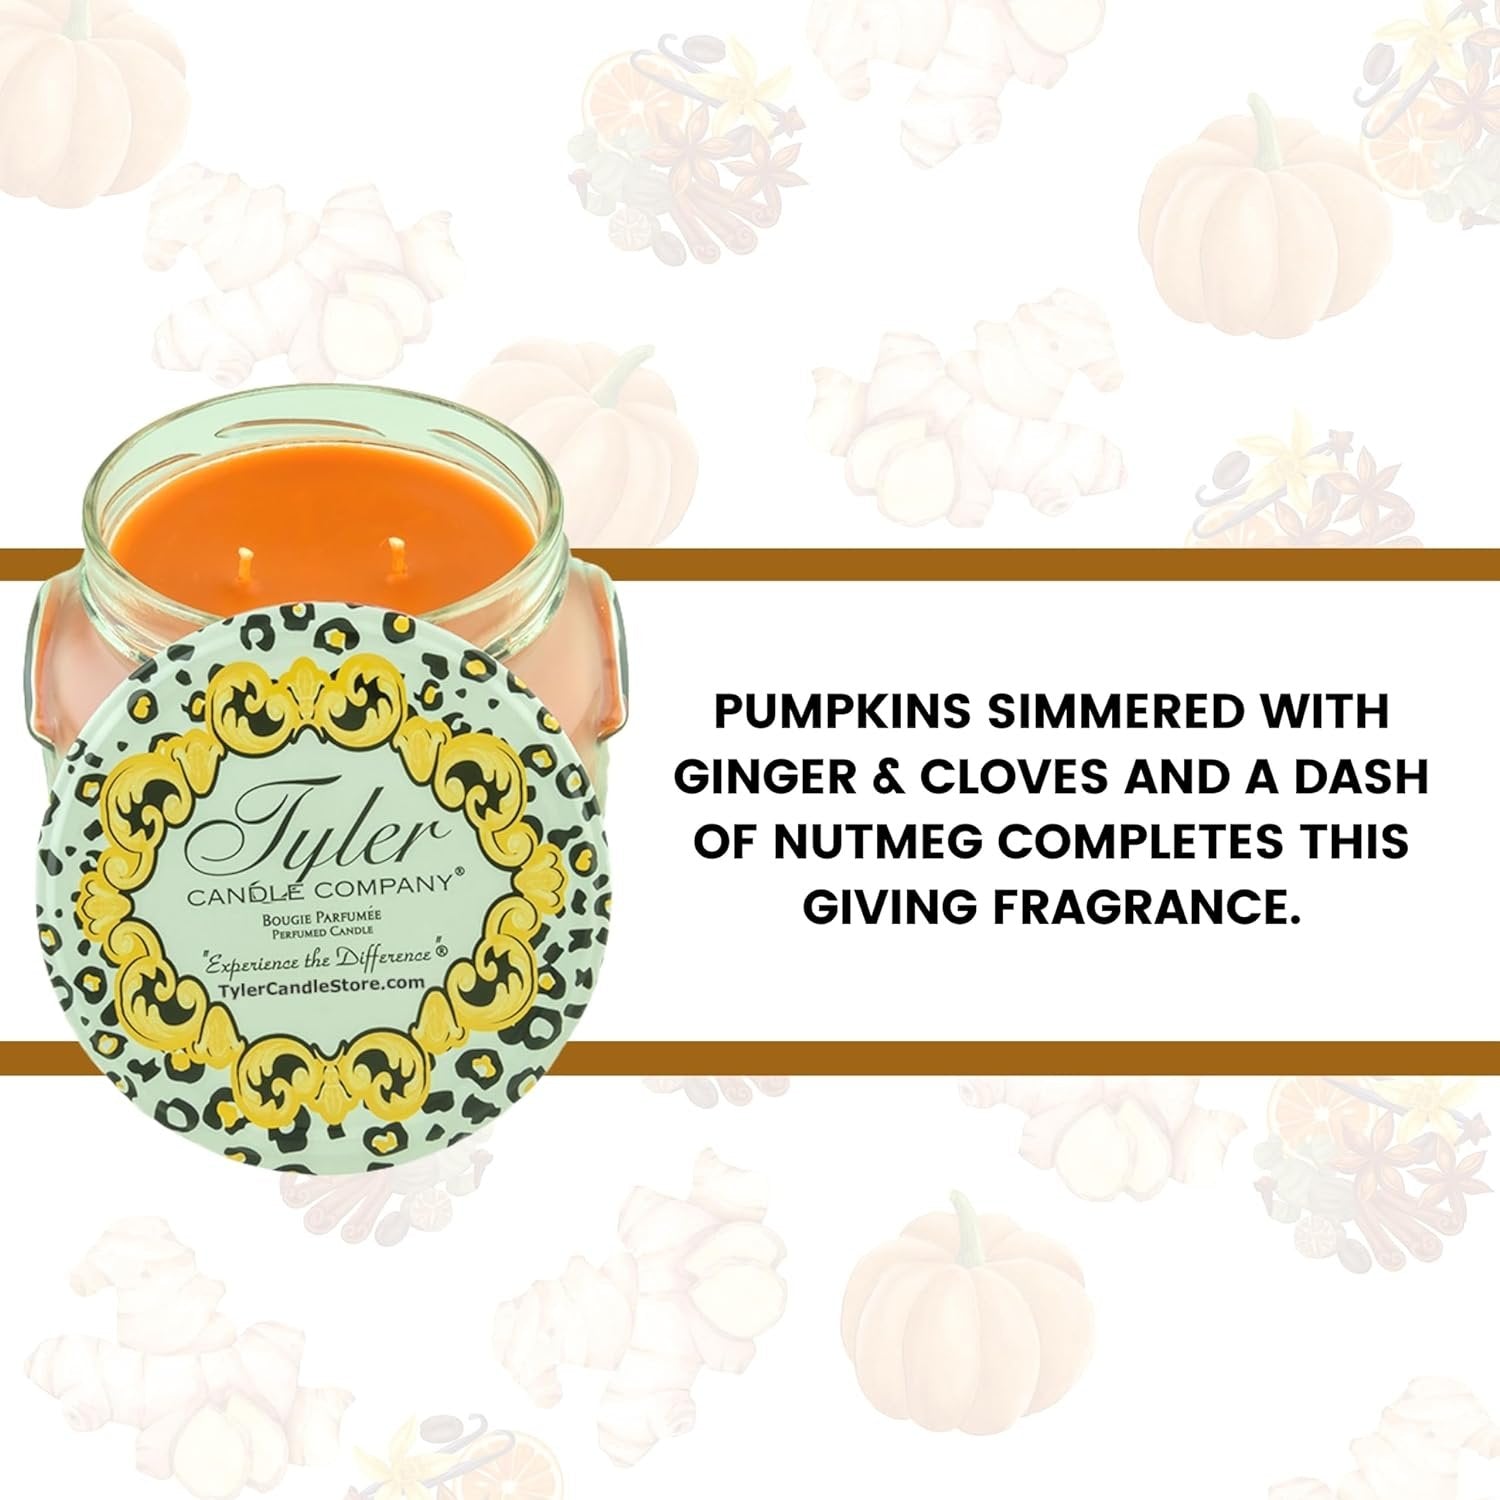 Tyler Candle Company - Tyler Home Fragrance Pumpkin Spice Candle 11 Oz Glass Jar - Fall Candle Scents, Halloween Candles